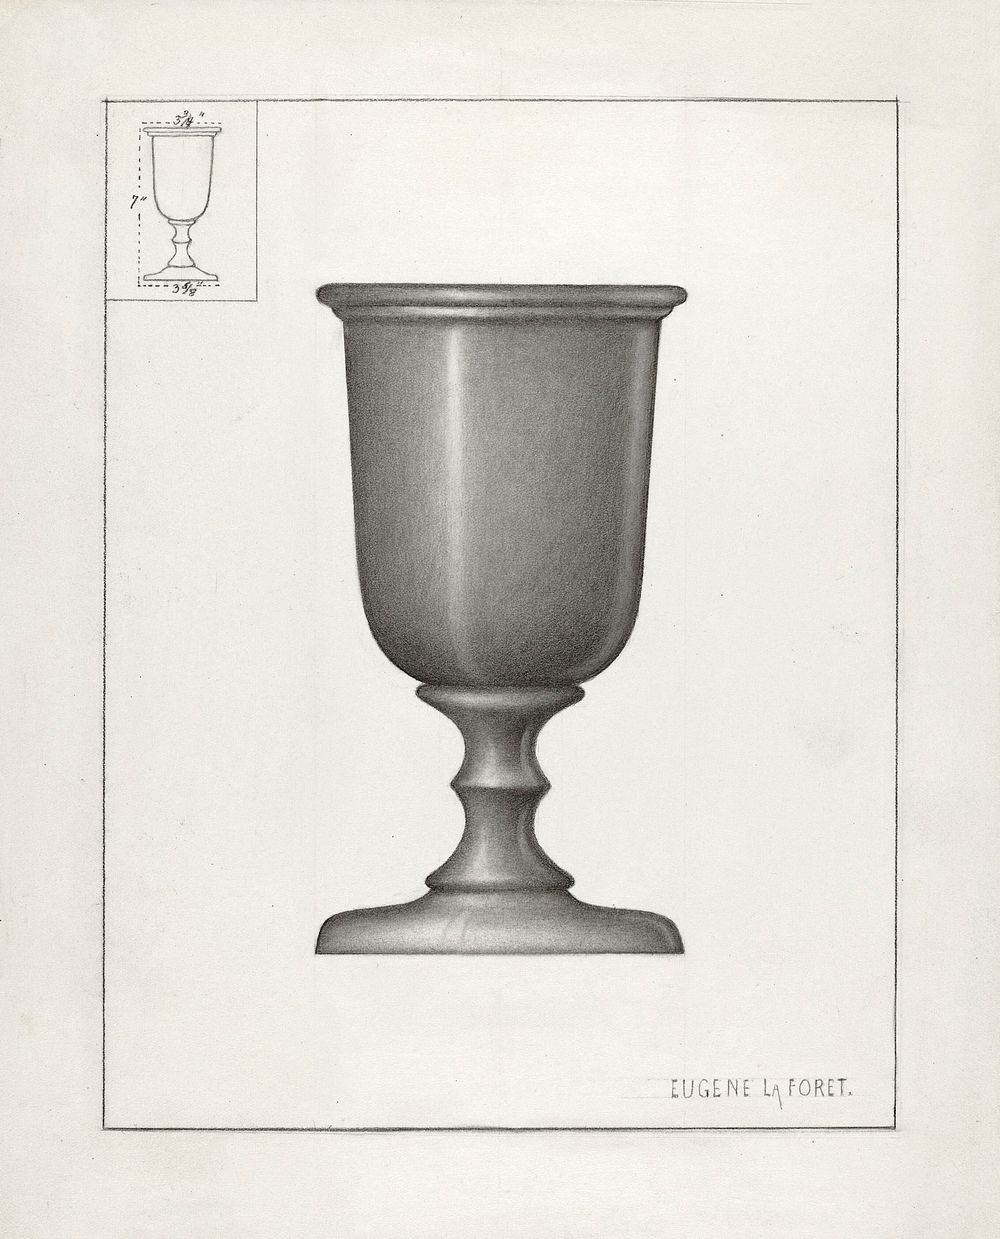 Pewter Chalice (ca. 1936) by Eugene La Foret. Original from The National Gallery of Art. Digitally enhanced by rawpixel.